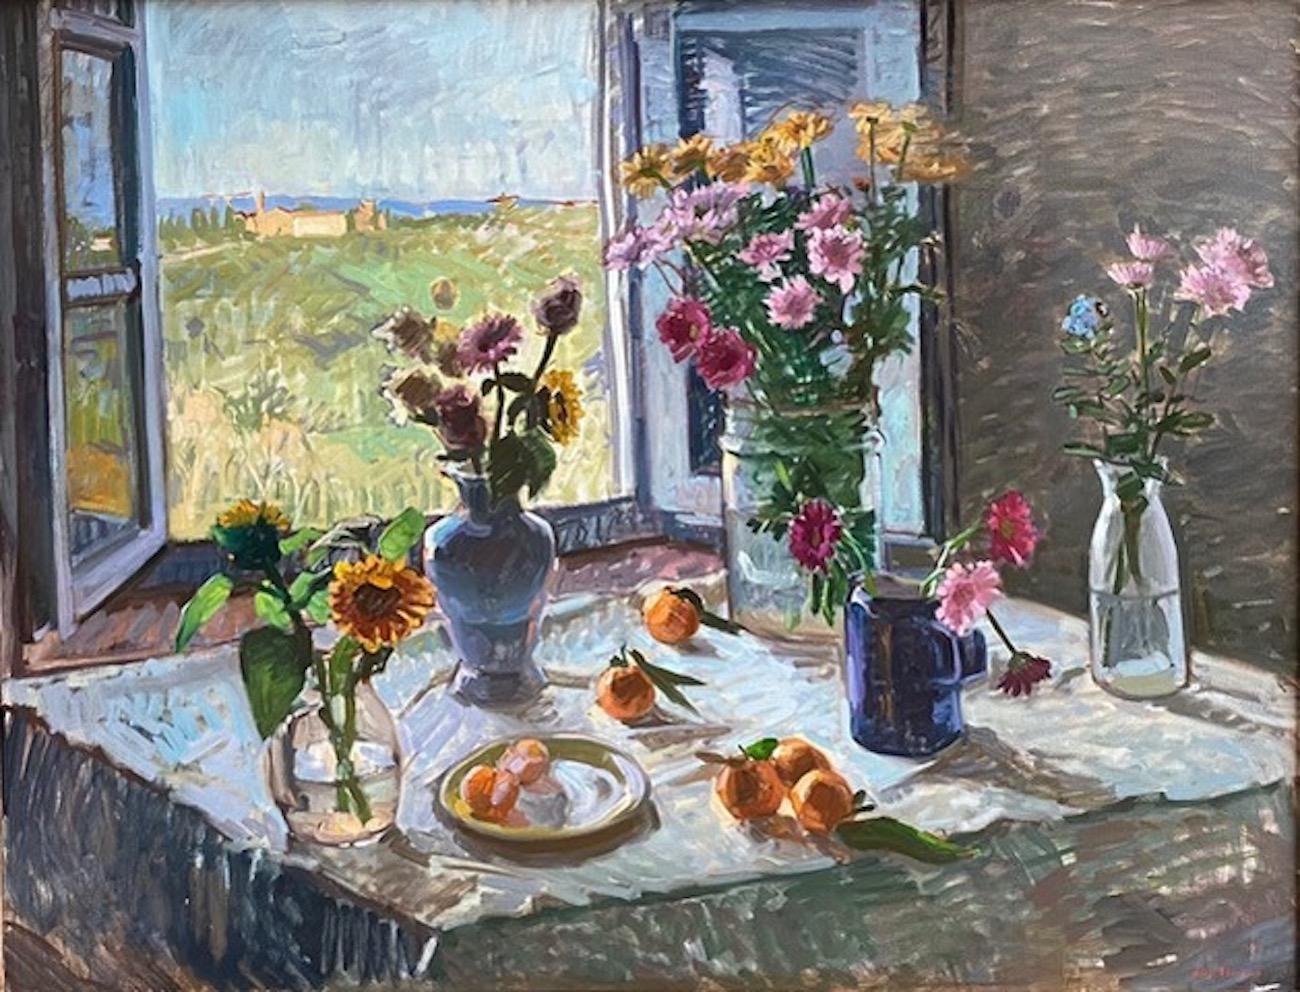 Amy Florence Still-Life Painting - "Looking Towards Bonazza" contemporary bright still life with Tuscan Landscape